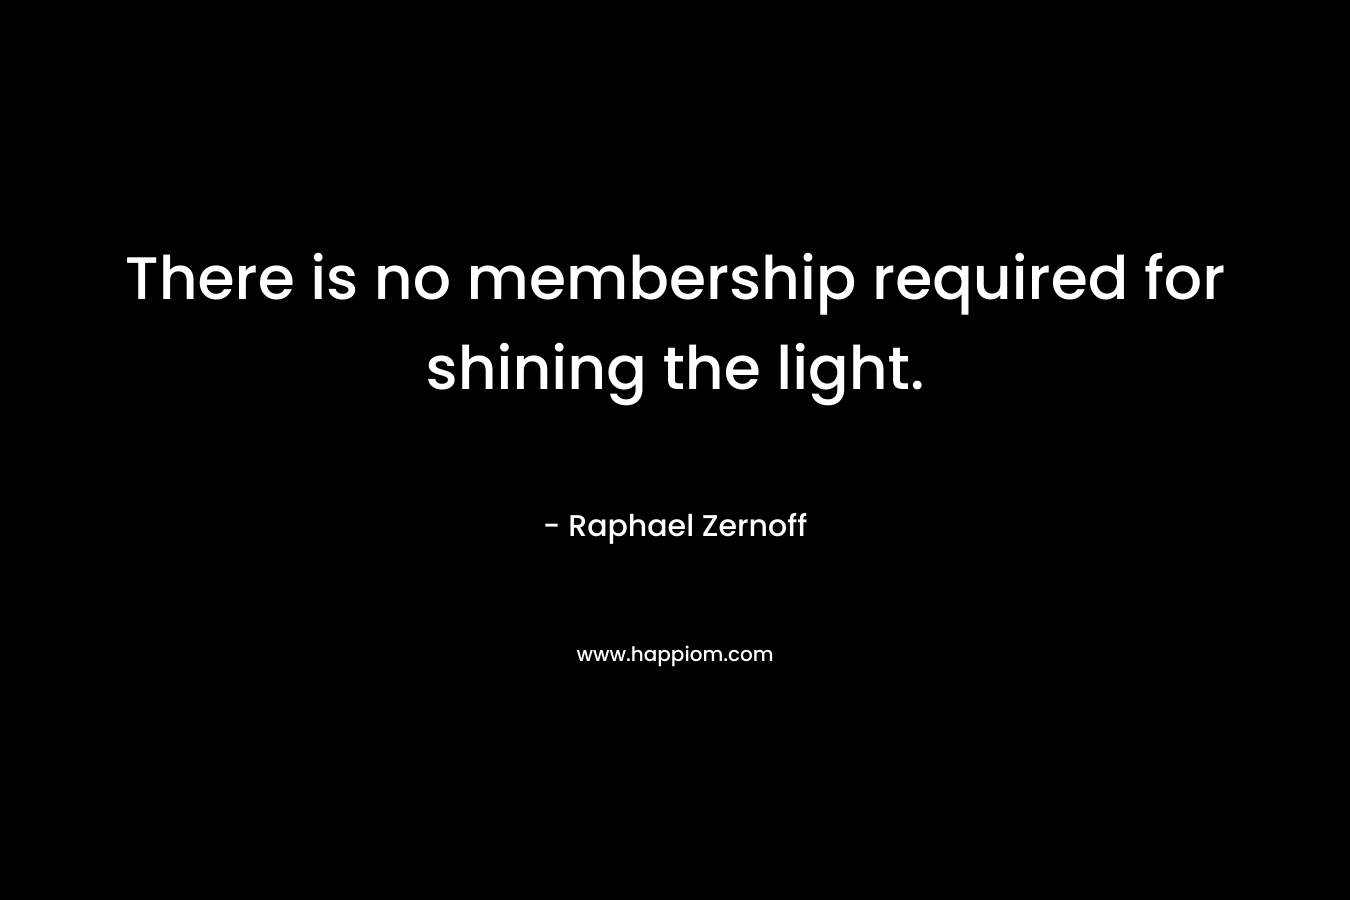 There is no membership required for shining the light.